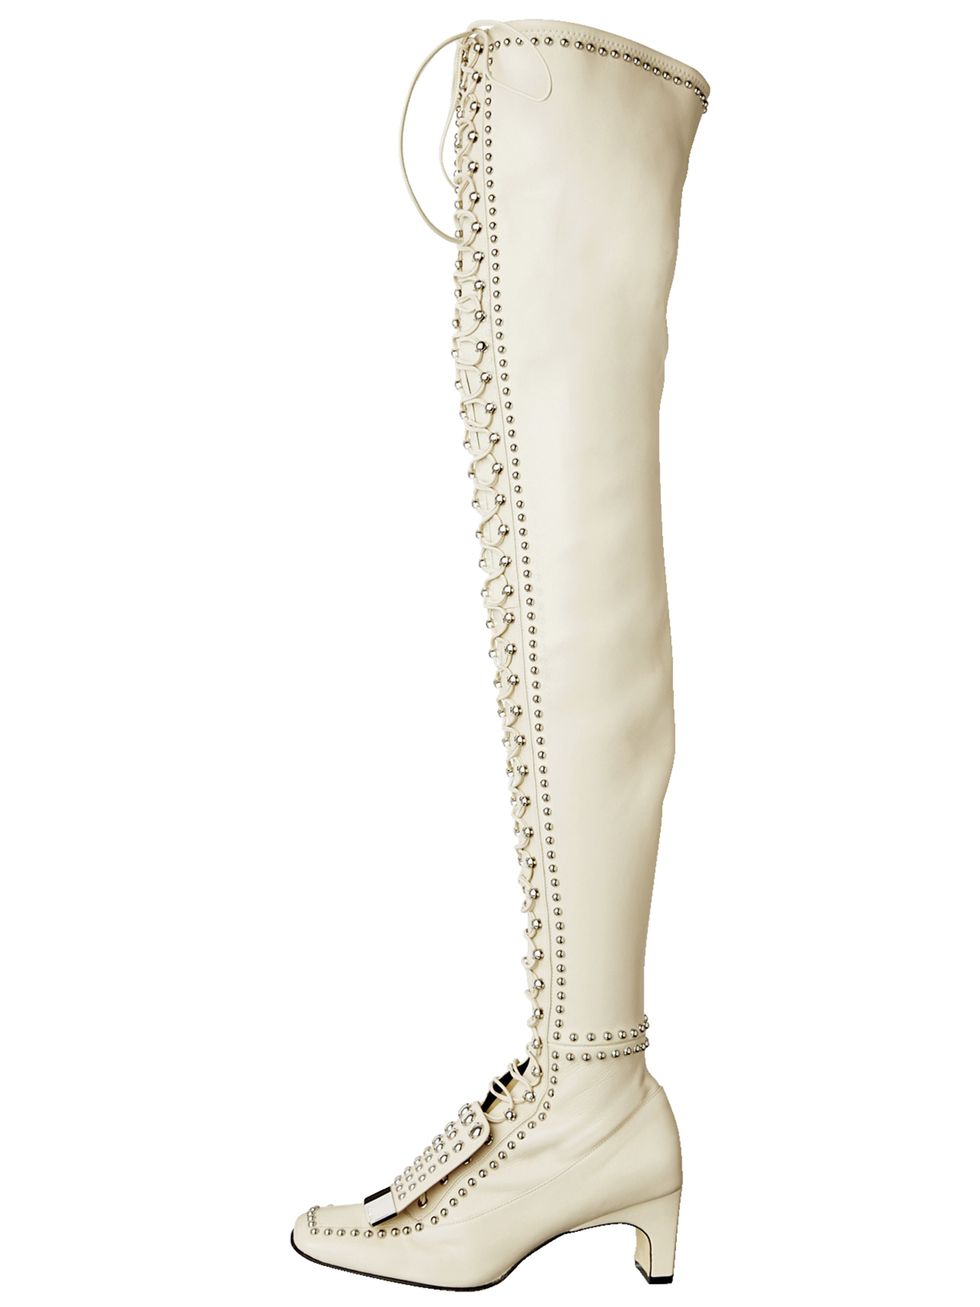 Tan, Beige, Foot, Sandal, High heels, Toe, Musical instrument accessory, Fashion design, Knee-high boot, Ankle, 